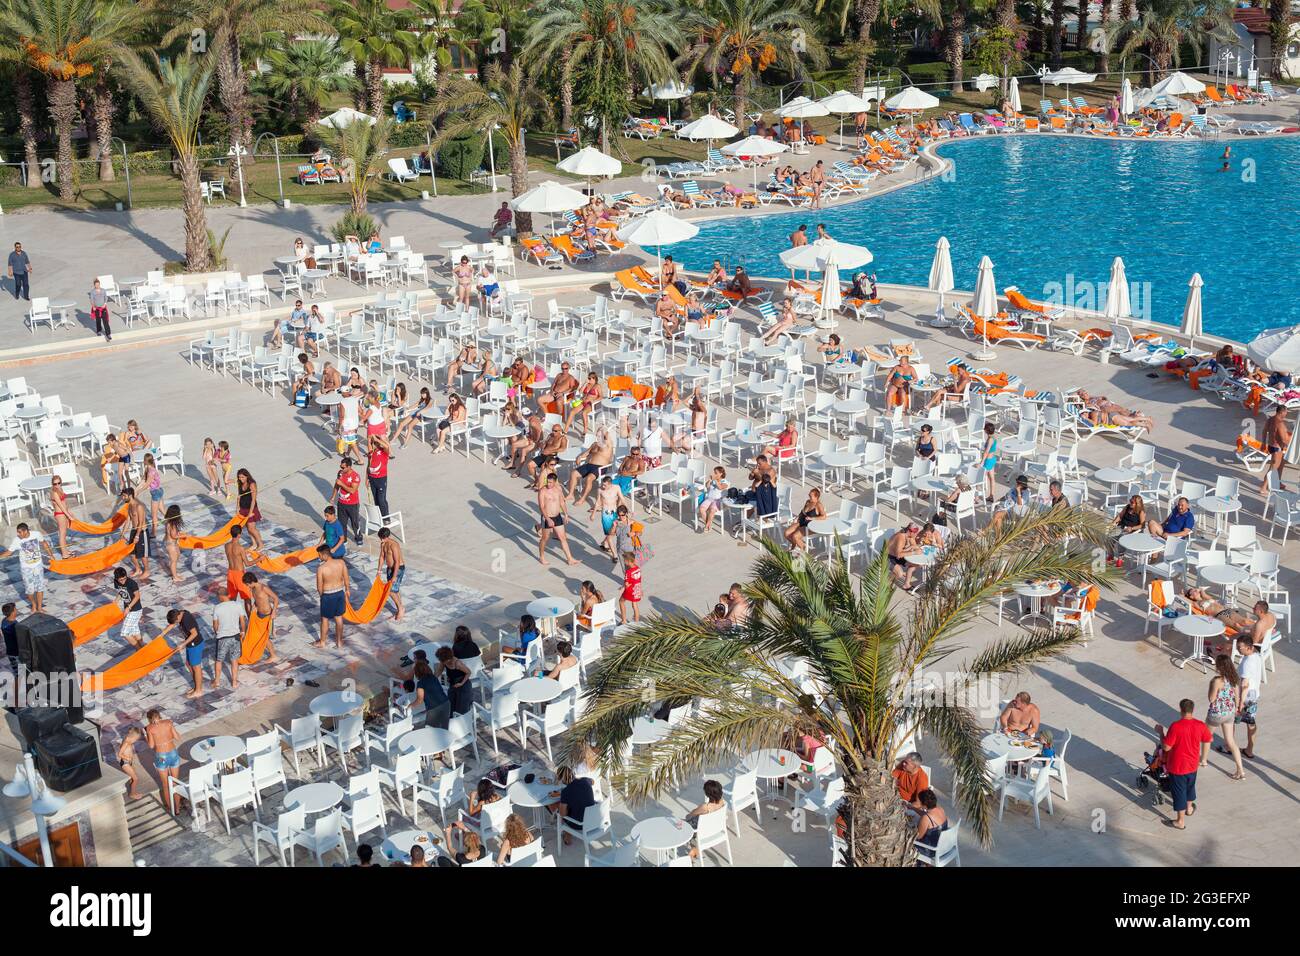 Antalya, Turkey-October 18, 2013: Tourists watching animation show in hotel in a summer afternoon. Stock Photo